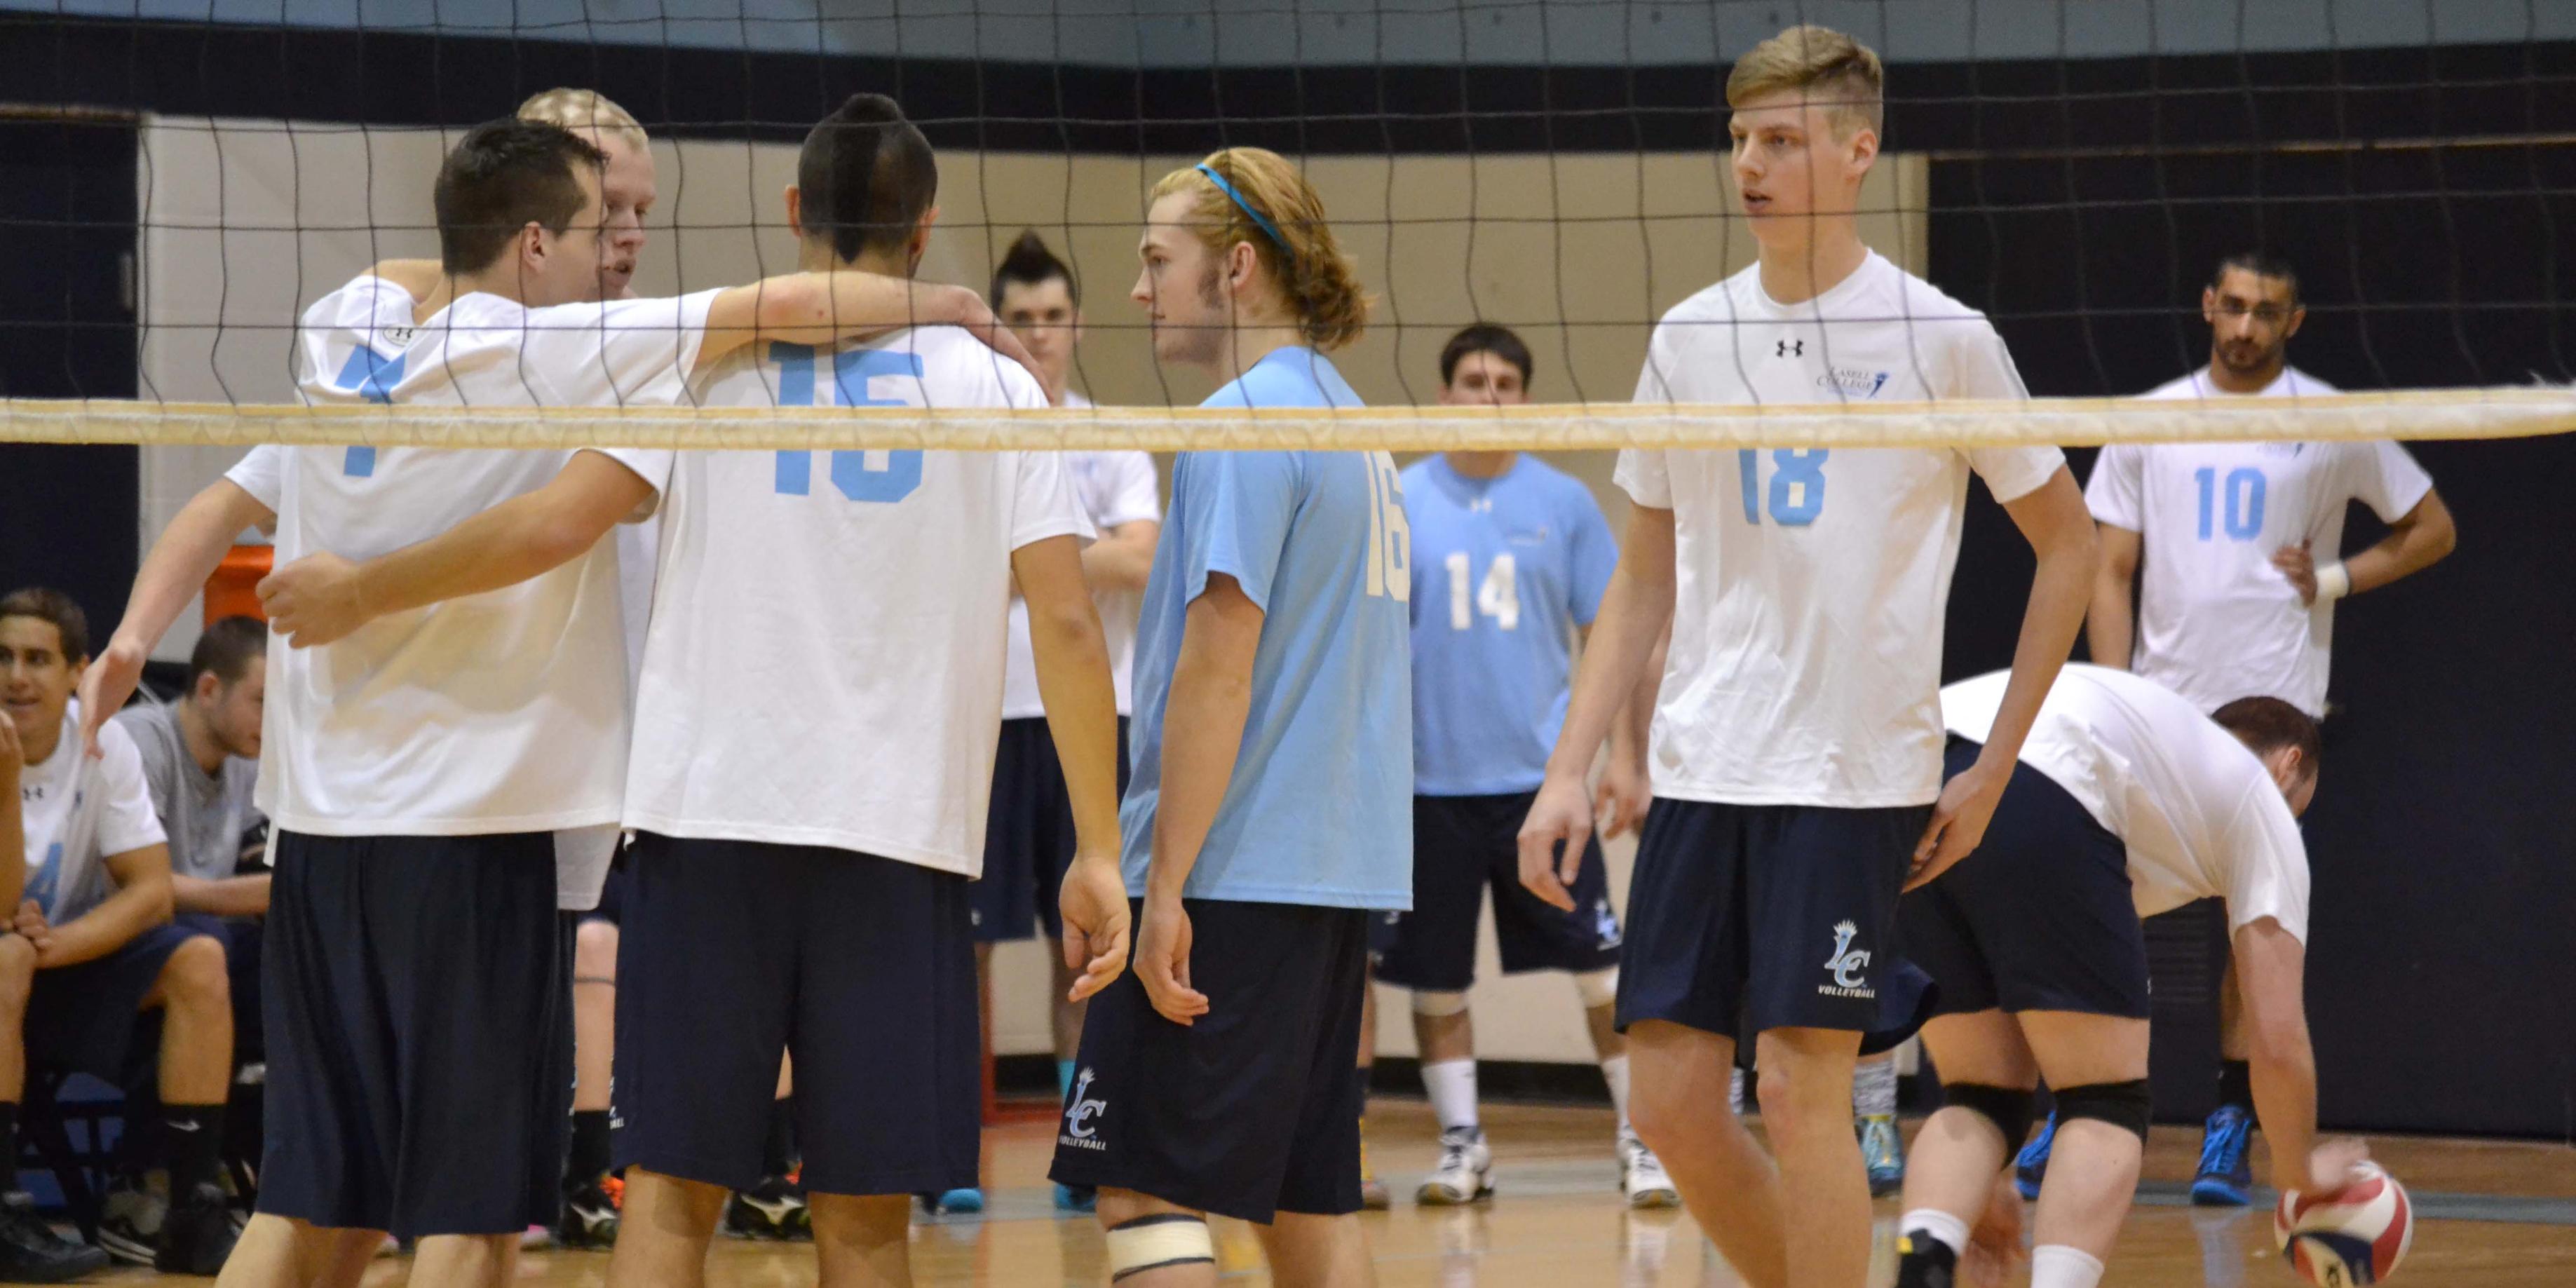 Men's Volleyball Takes Home 3-2 Conference Victory Over Emmanuel